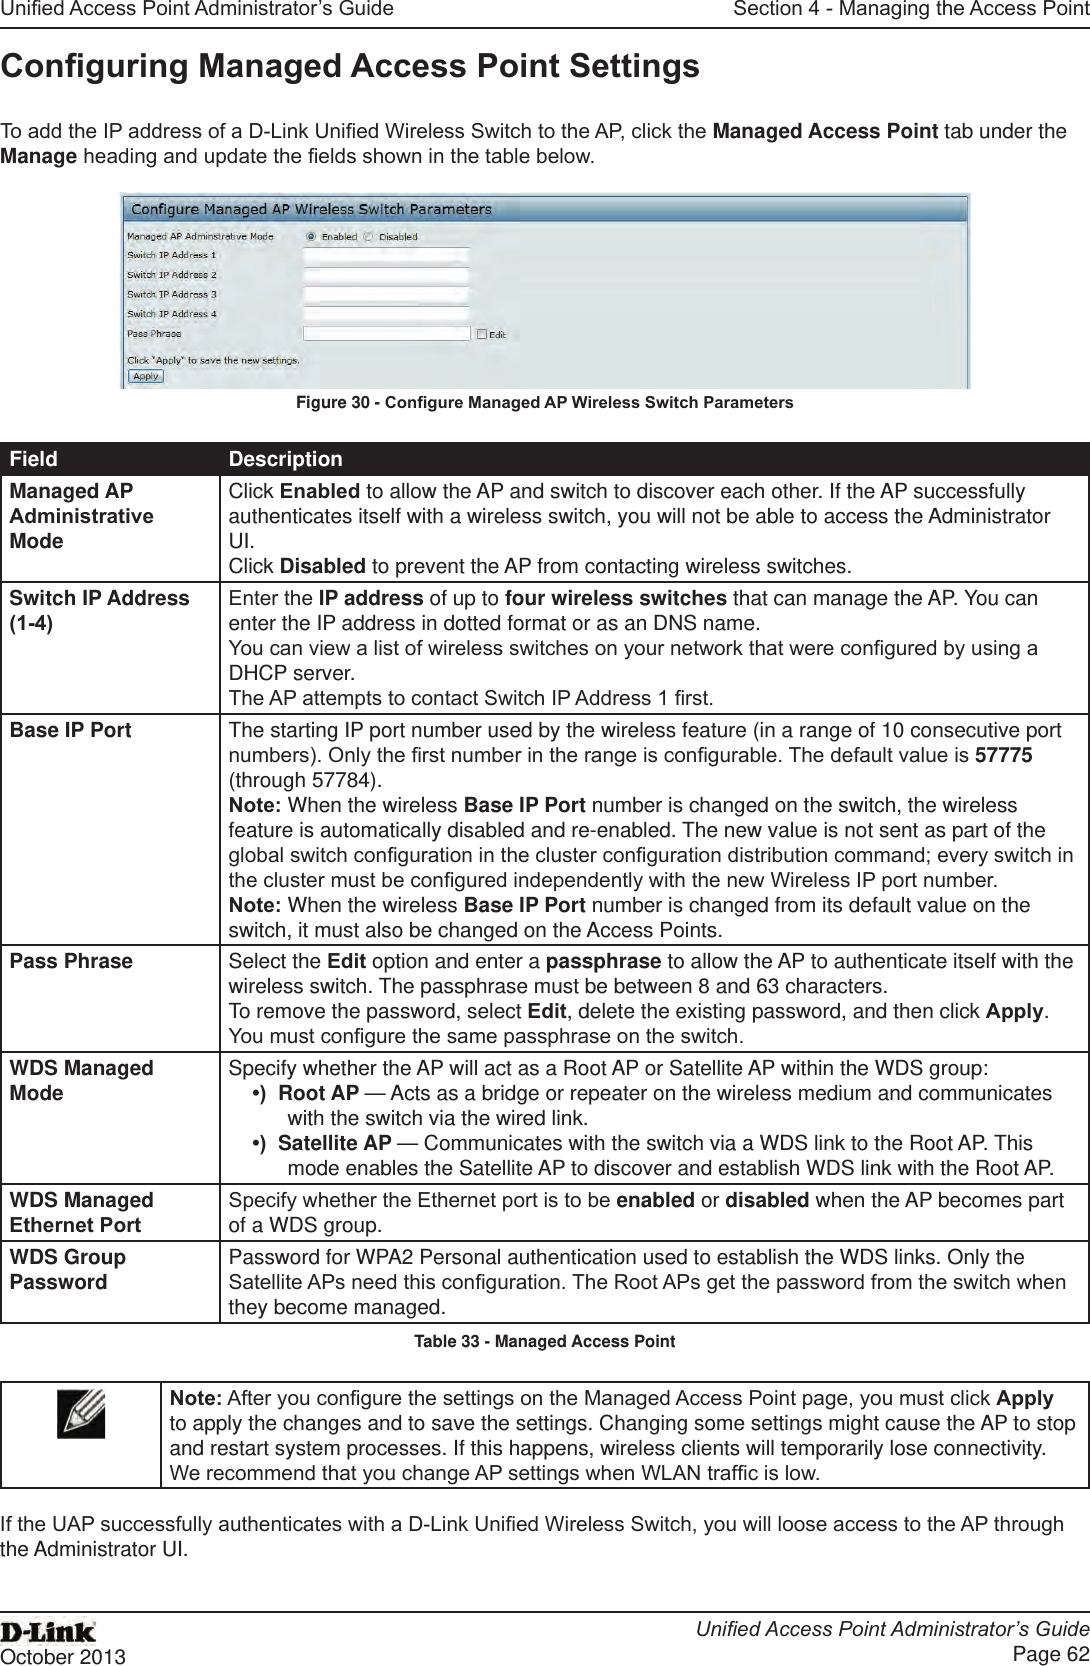 Unied Access Point Administrator’s GuideUnied Access Point Administrator’s GuidePage 62October 2013Section 4 - Managing the Access PointConguring Managed Access Point SettingsTo add the IP address of a D-Link Unied Wireless Switch to the AP, click the Managed Access Point tab under the Manage heading and update the elds shown in the table below.Figure 30 - Congure Managed AP Wireless Switch ParametersField DescriptionManaged AP Administrative ModeClick Enabled to allow the AP and switch to discover each other. If the AP successfully authenticates itself with a wireless switch, you will not be able to access the Administrator UI. Click Disabled to prevent the AP from contacting wireless switches.Switch IP Address (1-4)Enter the IP address of up to four wireless switches that can manage the AP. You can enter the IP address in dotted format or as an DNS name.You can view a list of wireless switches on your network that were congured by using a DHCP server.The AP attempts to contact Switch IP Address 1 rst.Base IP Port The starting IP port number used by the wireless feature (in a range of 10 consecutive port numbers). Only the rst number in the range is congurable. The default value is 57775 (through 57784).Note: When the wireless Base IP Port number is changed on the switch, the wireless feature is automatically disabled and re-enabled. The new value is not sent as part of the global switch conguration in the cluster conguration distribution command; every switch in the cluster must be congured independently with the new Wireless IP port number.Note: When the wireless Base IP Port number is changed from its default value on the switch, it must also be changed on the Access Points.Pass Phrase Select the Edit option and enter a passphrase to allow the AP to authenticate itself with the wireless switch. The passphrase must be between 8 and 63 characters. To remove the password, select Edit, delete the existing password, and then click Apply.You must congure the same passphrase on the switch.WDS Managed Mode Specify whether the AP will act as a Root AP or Satellite AP within the WDS group:•)  Root AP — Acts as a bridge or repeater on the wireless medium and communicates with the switch via the wired link.•)  Satellite AP — Communicates with the switch via a WDS link to the Root AP. This mode enables the Satellite AP to discover and establish WDS link with the Root AP.WDS Managed Ethernet PortSpecify whether the Ethernet port is to be enabled or disabled when the AP becomes part of a WDS group.WDS Group Password Password for WPA2 Personal authentication used to establish the WDS links. Only the Satellite APs need this conguration. The Root APs get the password from the switch when they become managed.Table 33 - Managed Access PointNote: After you congure the settings on the Managed Access Point page, you must click Apply to apply the changes and to save the settings. Changing some settings might cause the AP to stop and restart system processes. If this happens, wireless clients will temporarily lose connectivity. We recommend that you change AP settings when WLAN trafc is low. If the UAP successfully authenticates with a D-Link Unied Wireless Switch, you will loose access to the AP through the Administrator UI.